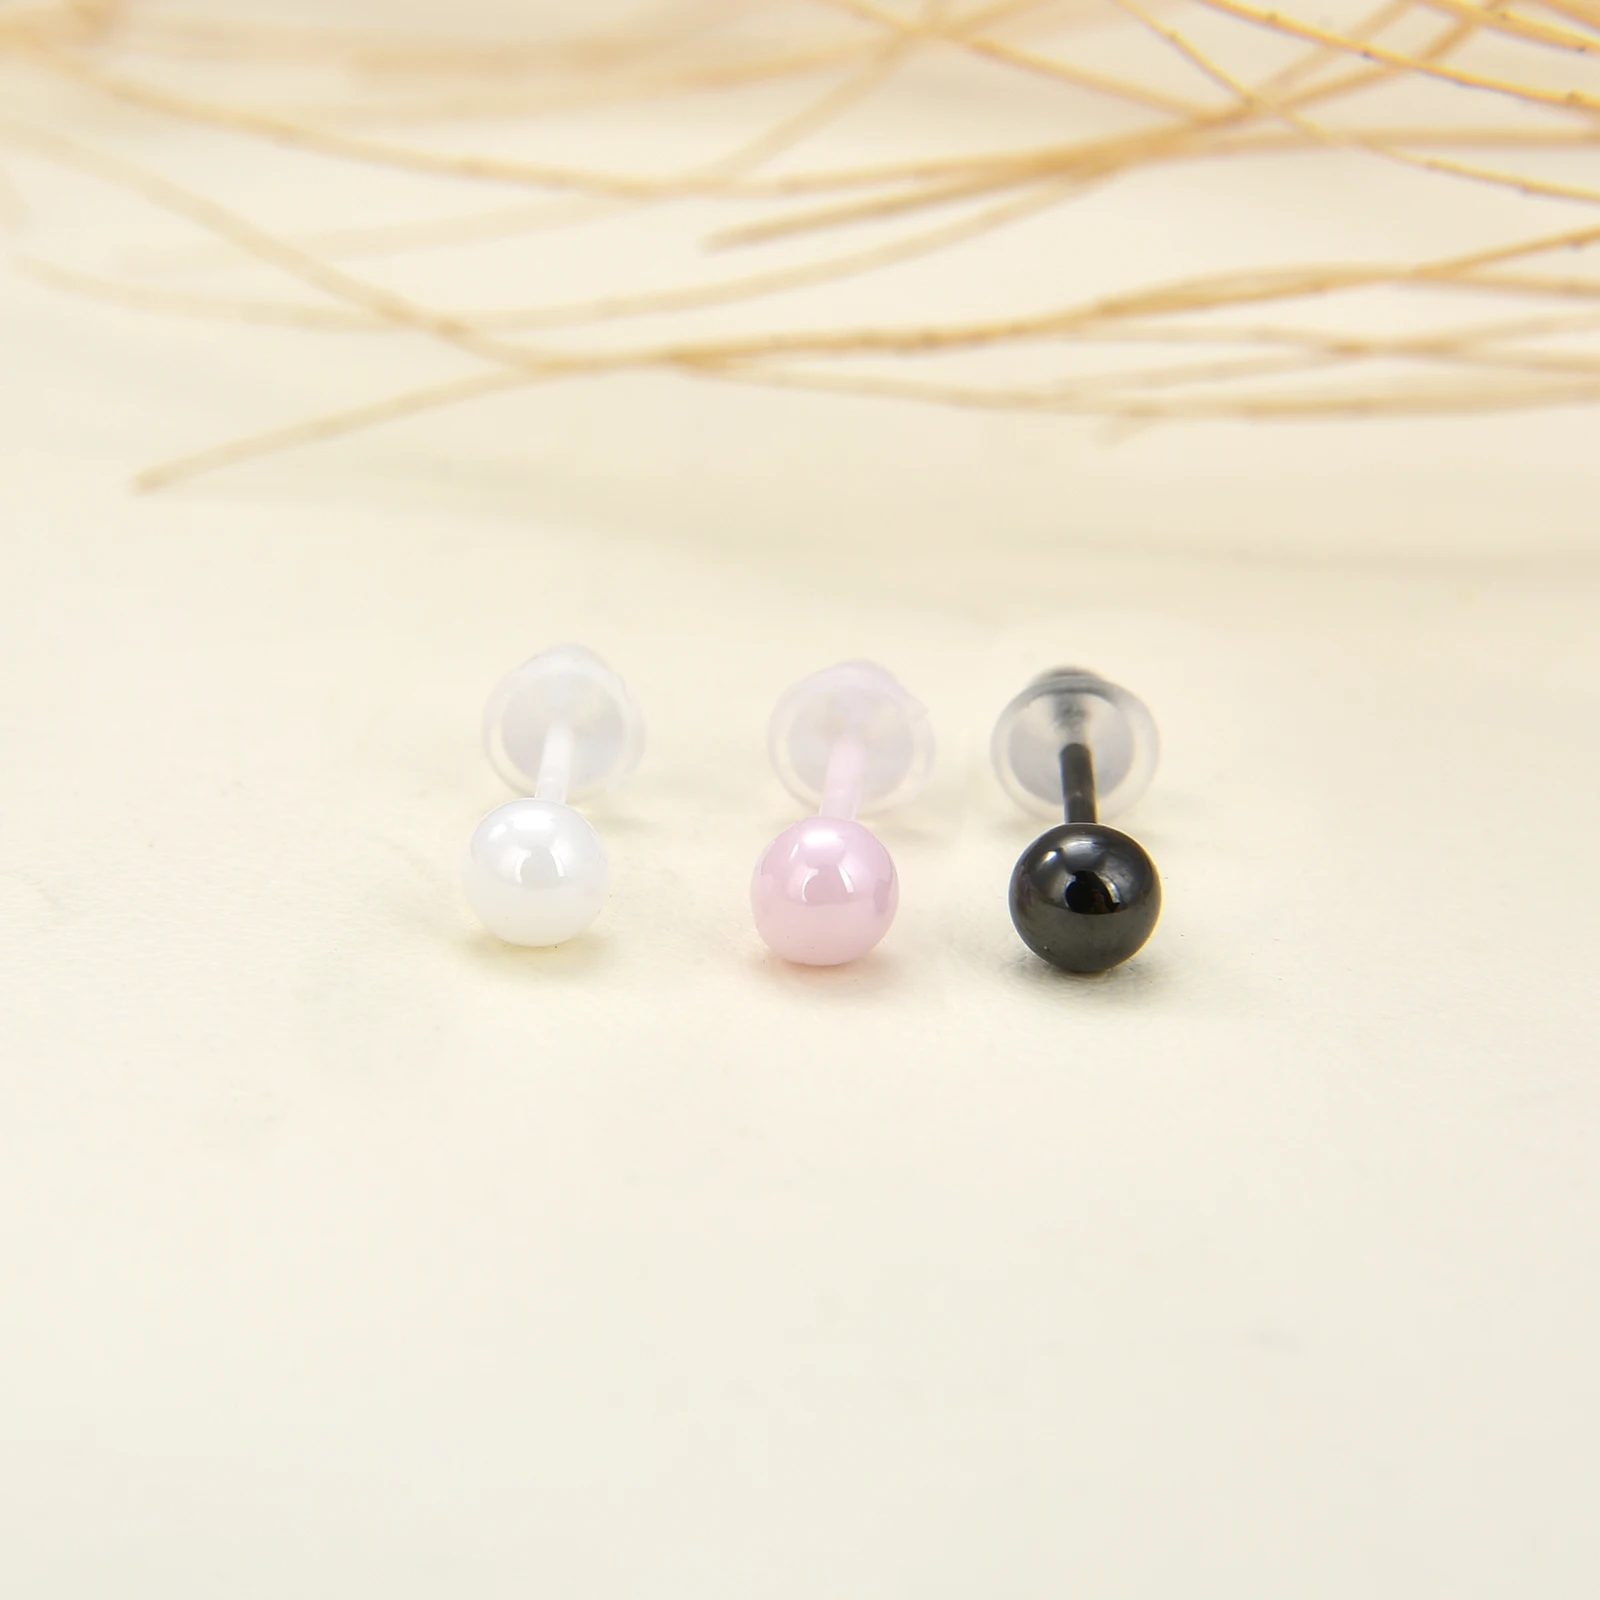 Clear Earrings Stud 20g Plastic Earrings Studs Earring Retainer For Work  Sports Surgery Clear Earring Retainers Round Flat Top Clear Earrings For